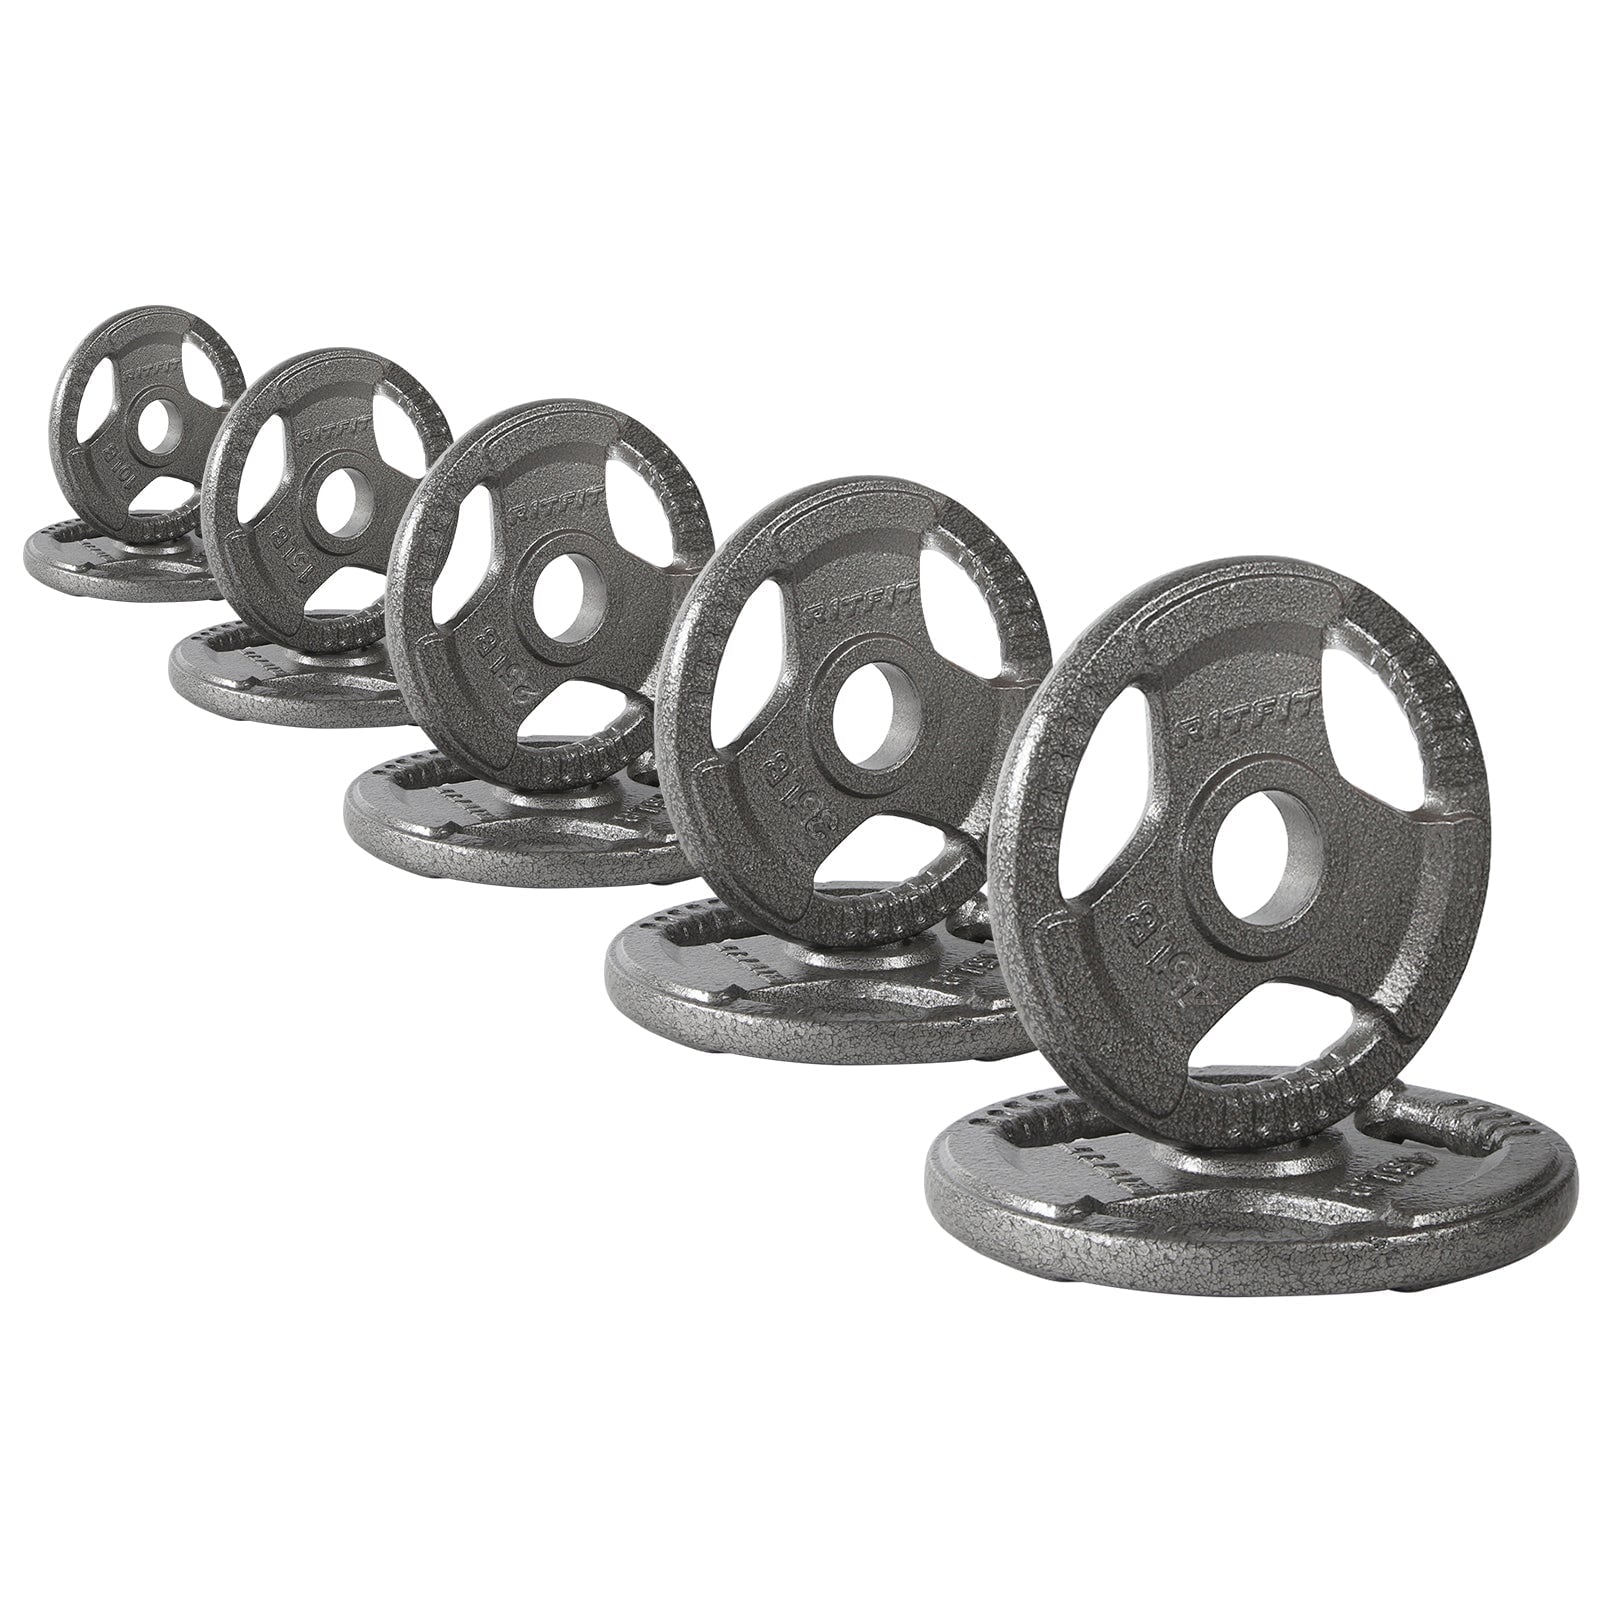 Cast Iron Weight Plates Set 2-Inch Olympic Grip Plates Bars&Plates RitFit 